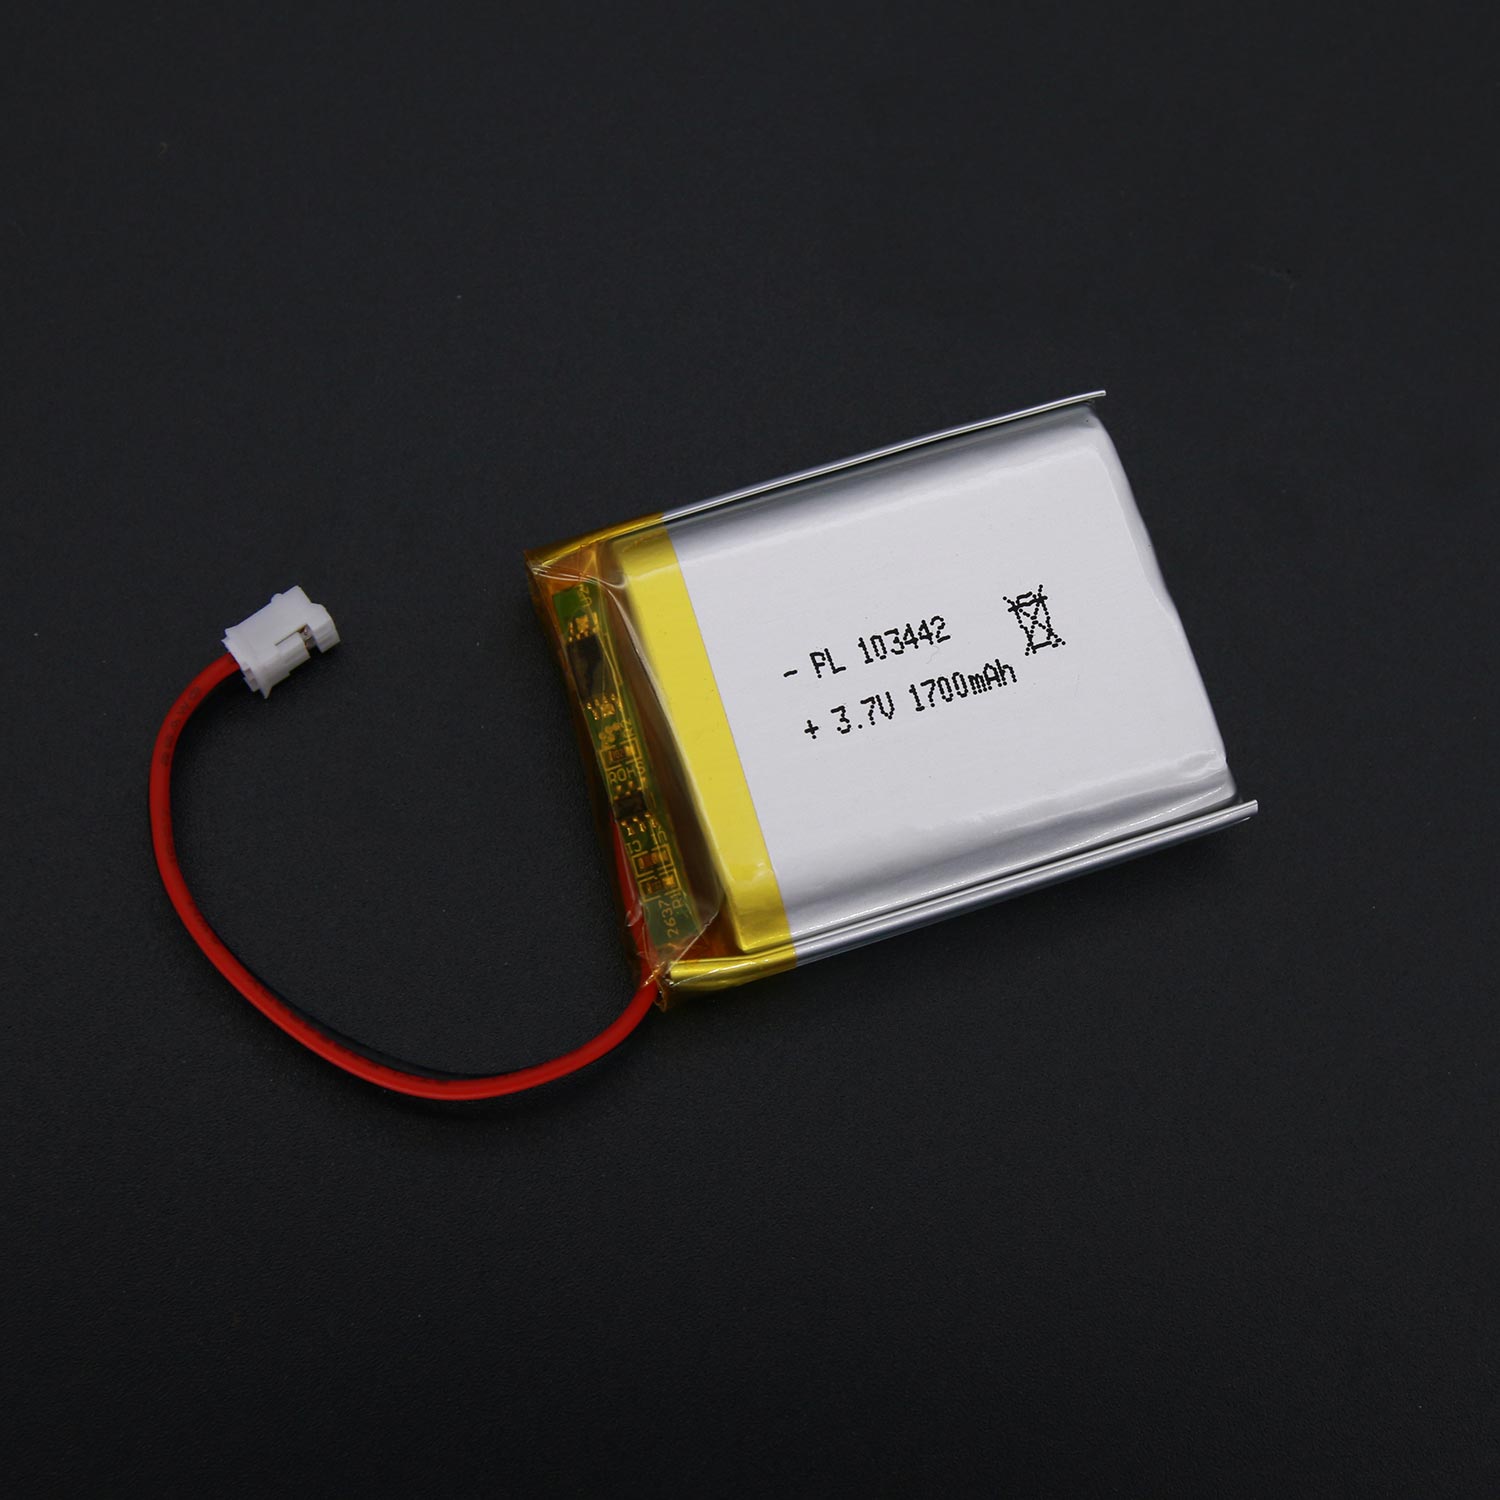 3.7V 1700mAh 103442 Rechargeable Lithium Polymer Battery